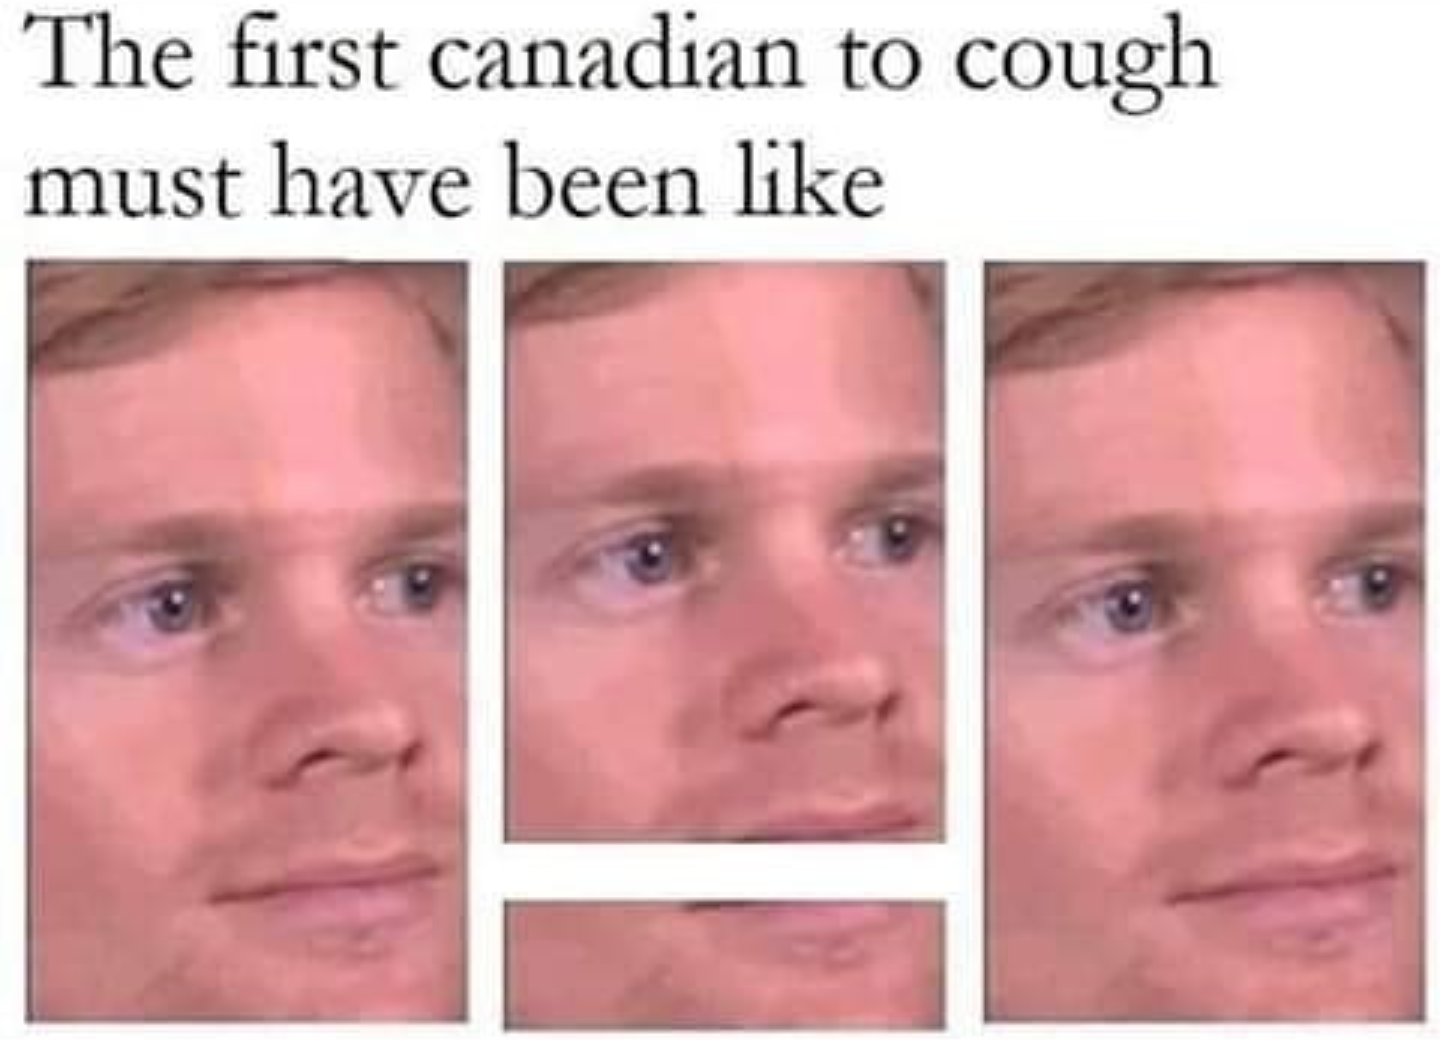 first canadian to cough must have been like - The first canadian to cough must have been